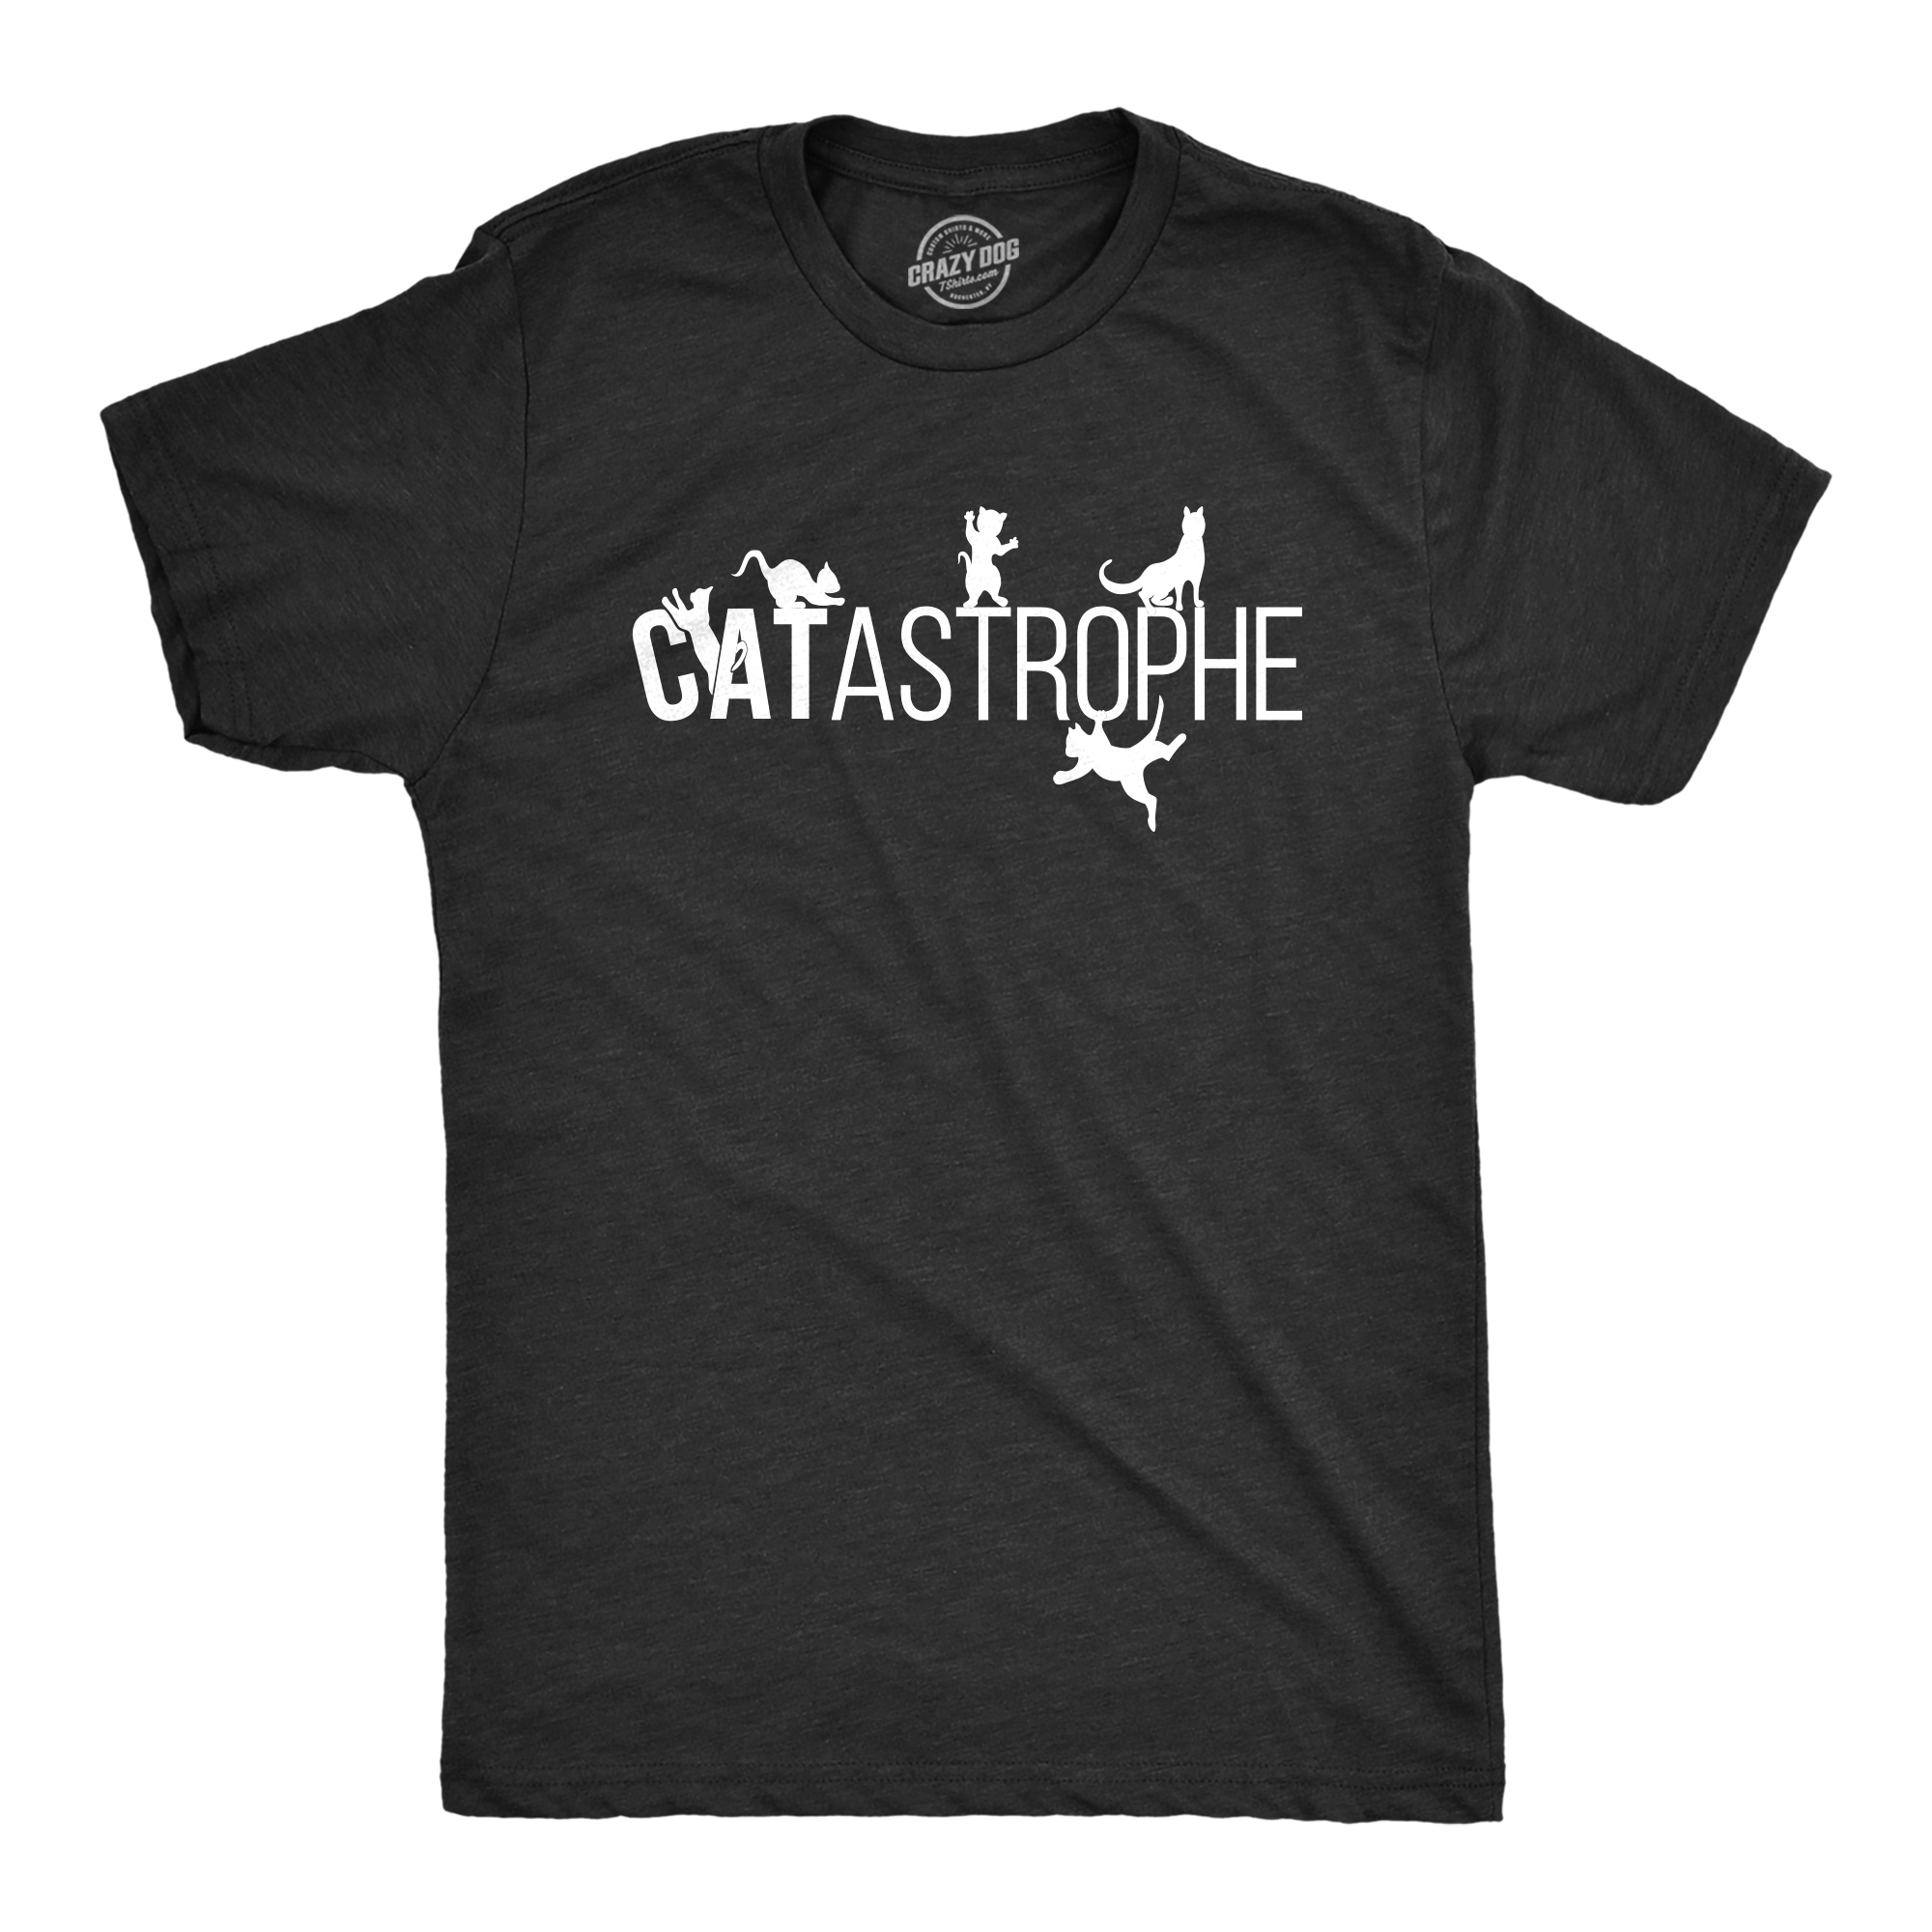 Crazy Dog Tshirts Mens Catastrophe T Shirt Funny Sarcastic Cat Kitten Joke Graphic Tee For Guys